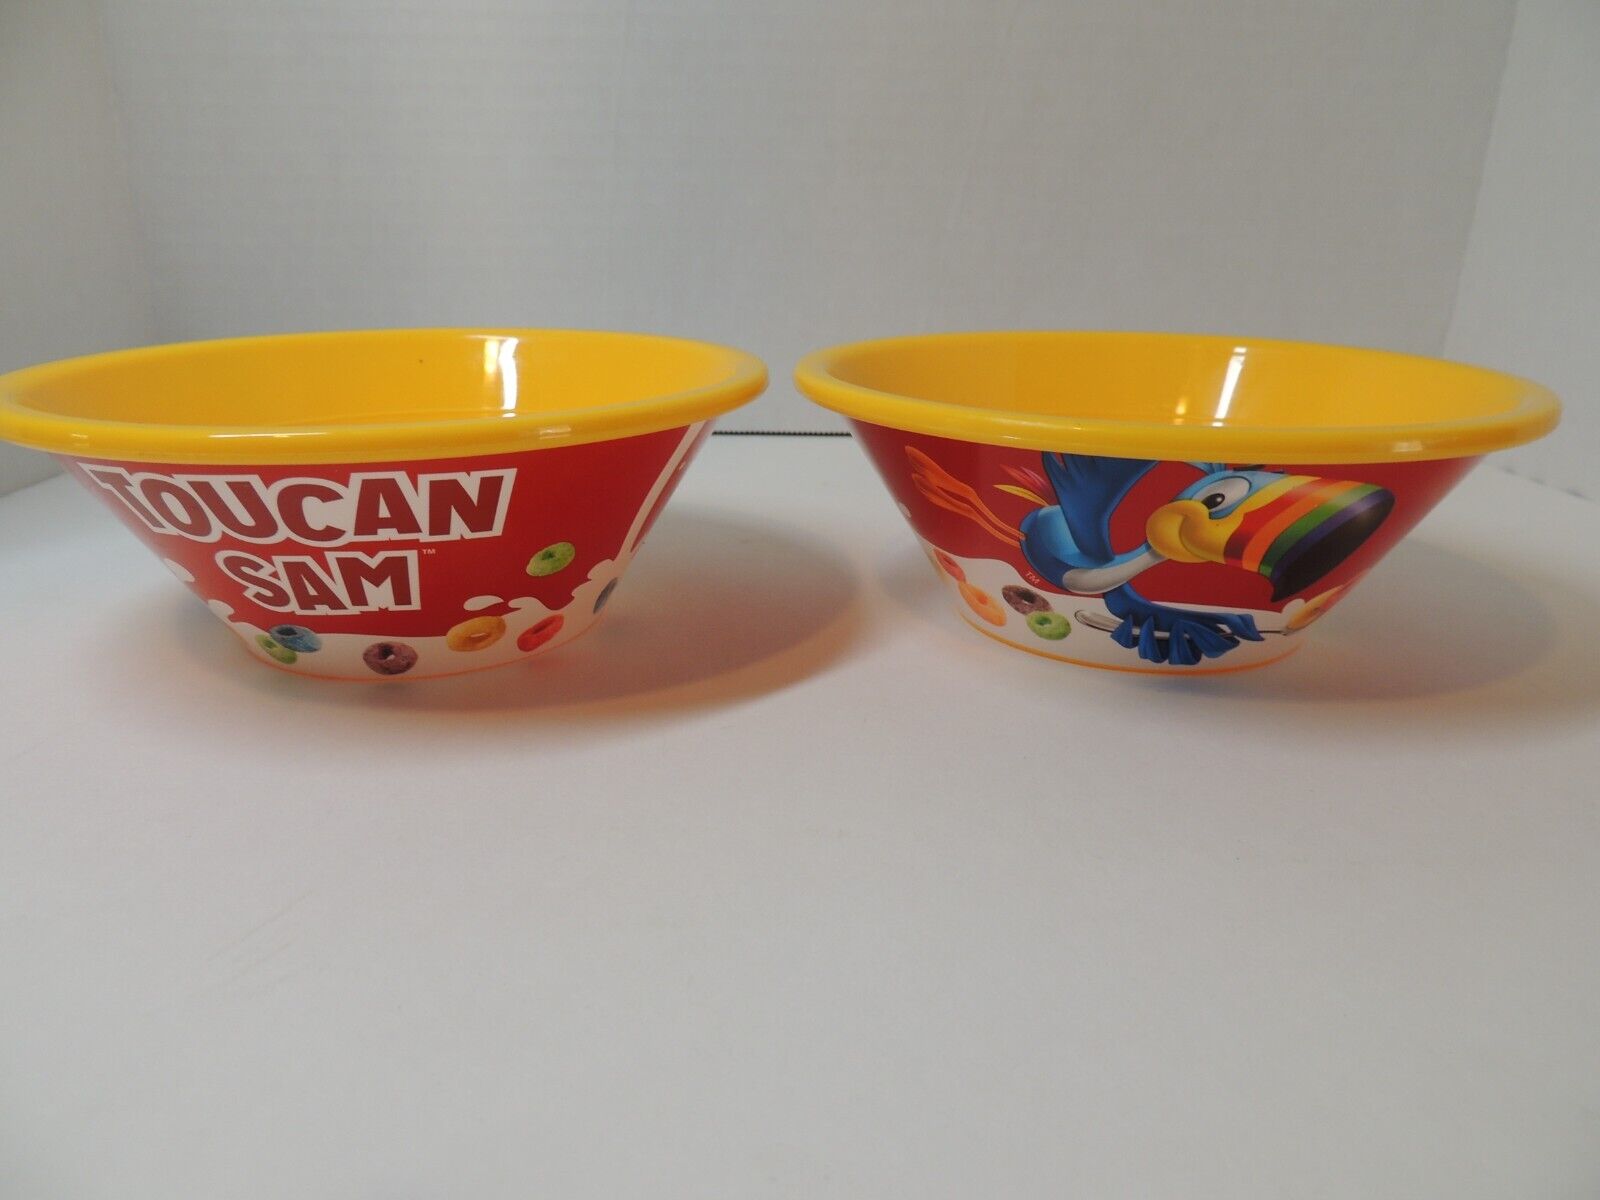 Toucan Sam Froot Loops Cereal Bowl set of two